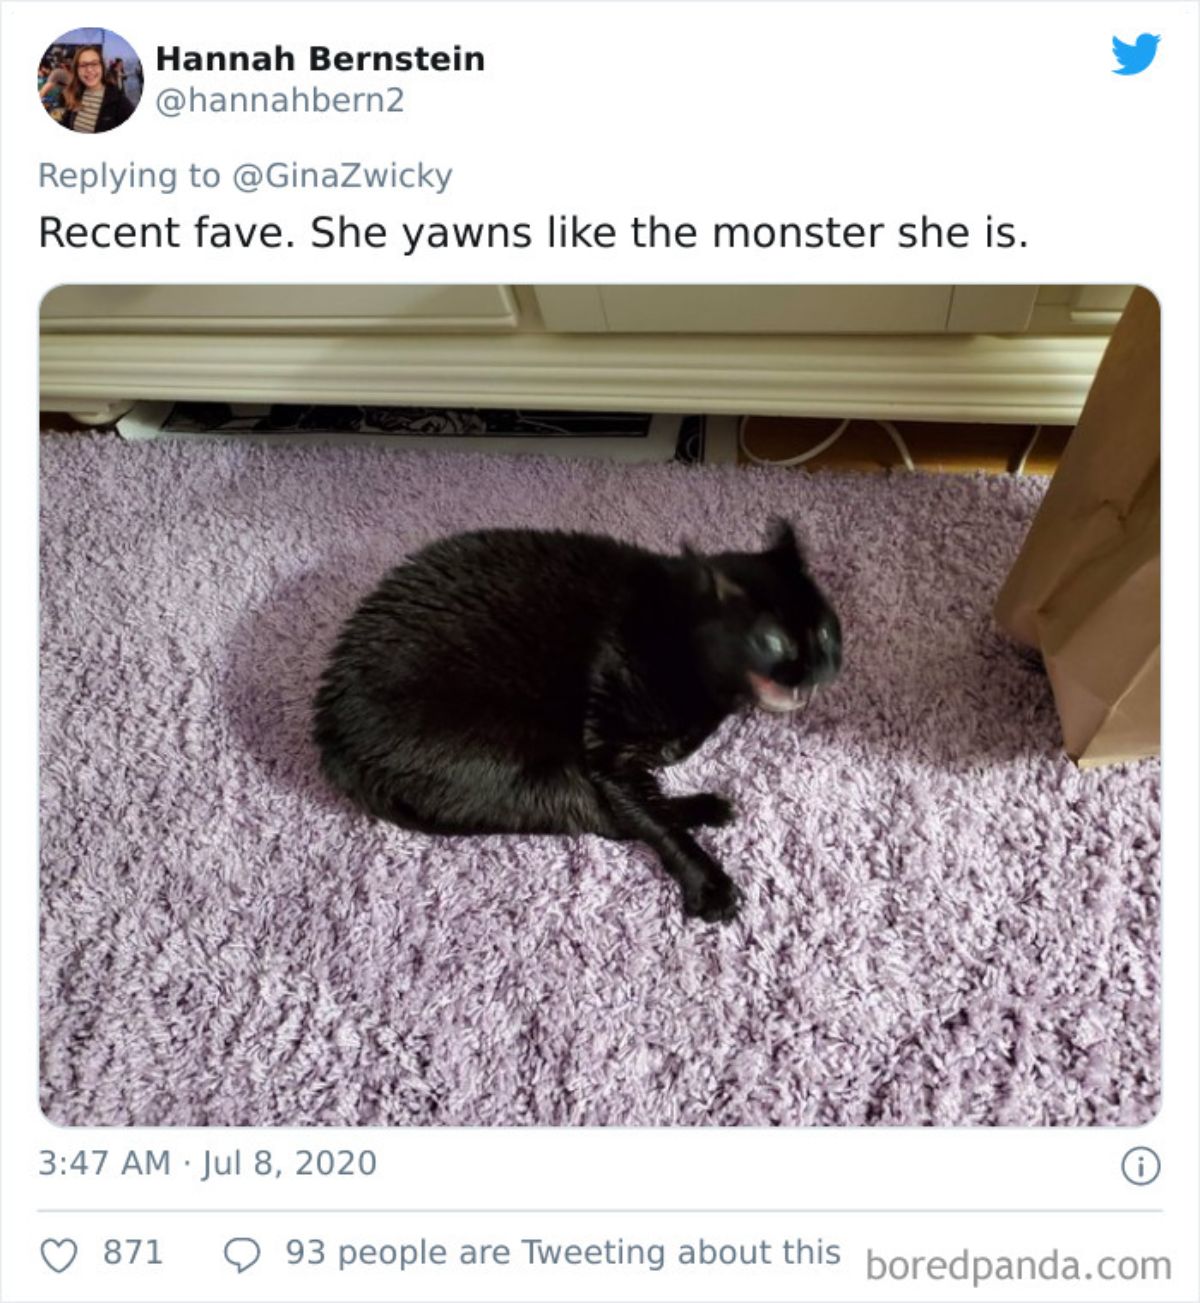 tweet of a blurry black cat with the mouth open on a purple carpet